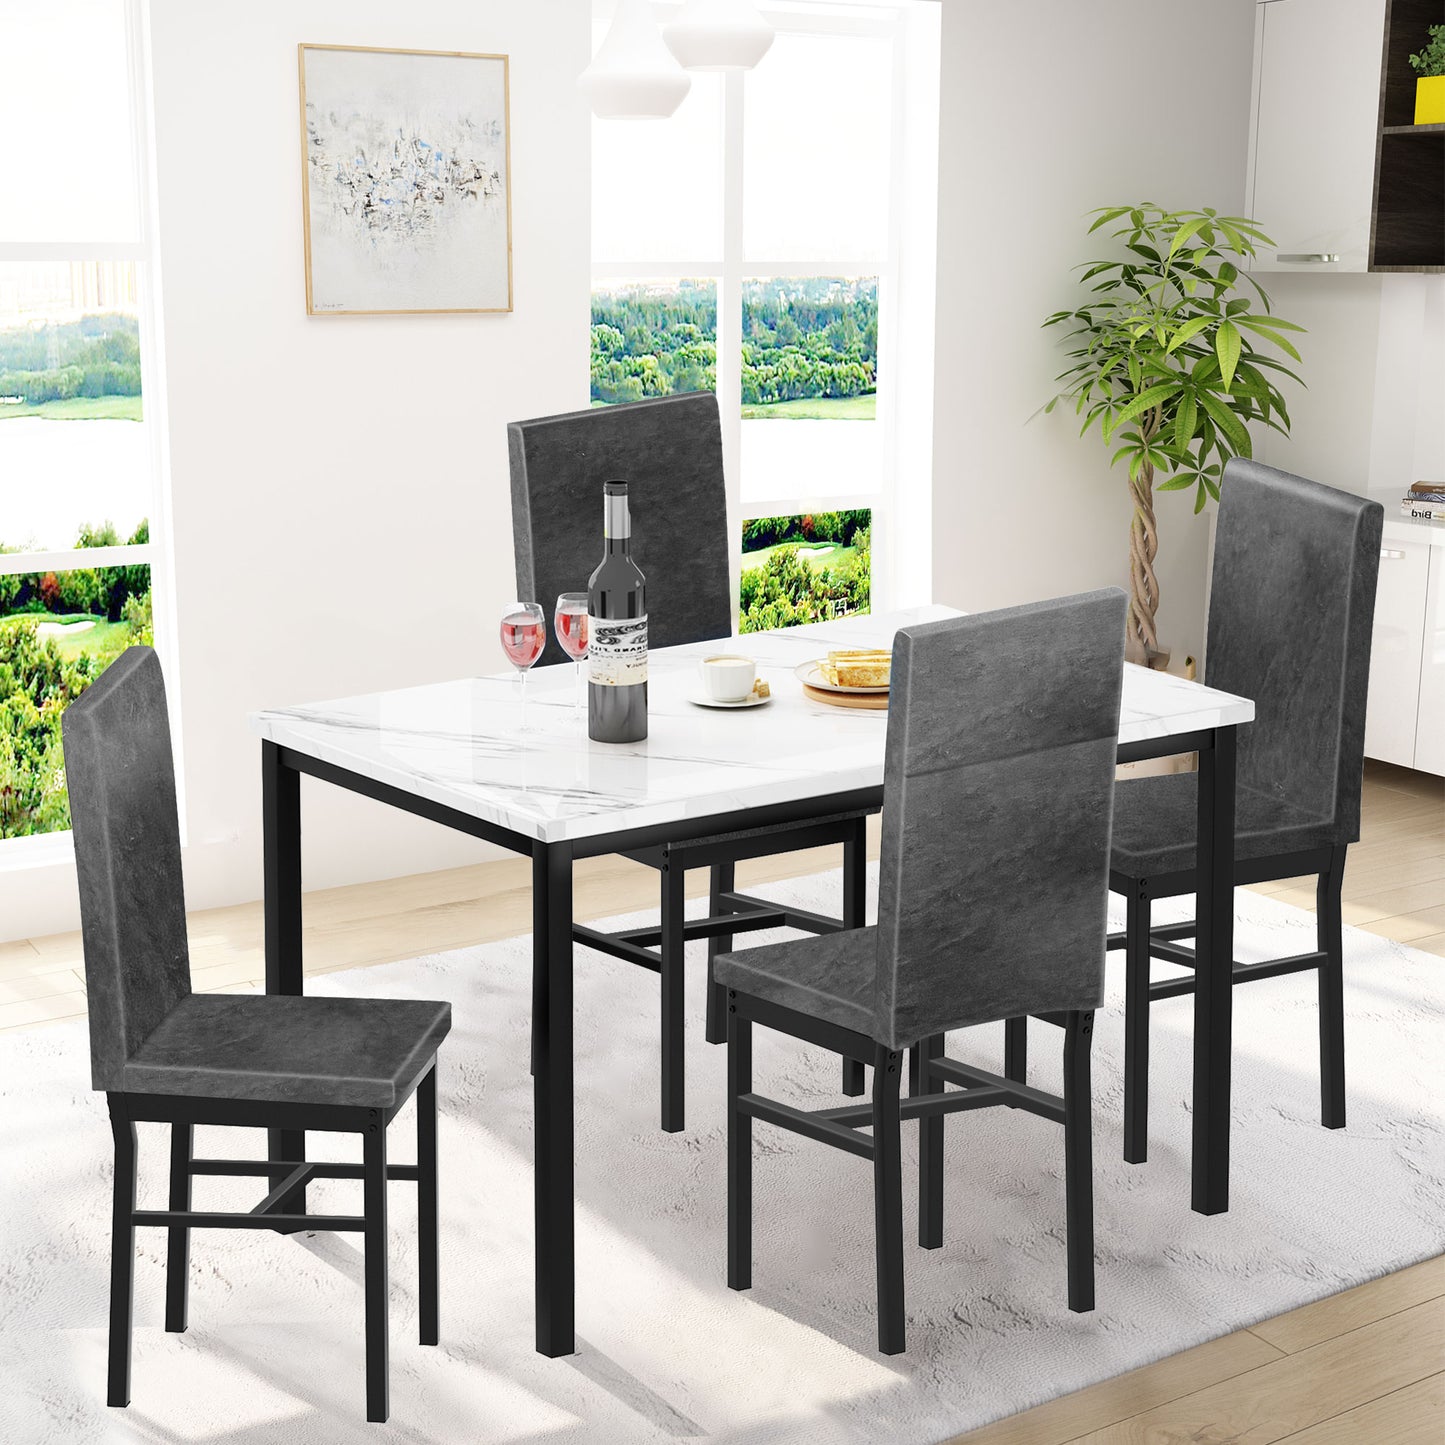 5 Piece Dining Set, Modern Dining Table and Chairs Set for 4, Kitchen Dining Table Set with Faux Marble Tabletop and 4 PU Leather Upholstered Chairs, for Small Space, Breakfast Nook, Black, Y006